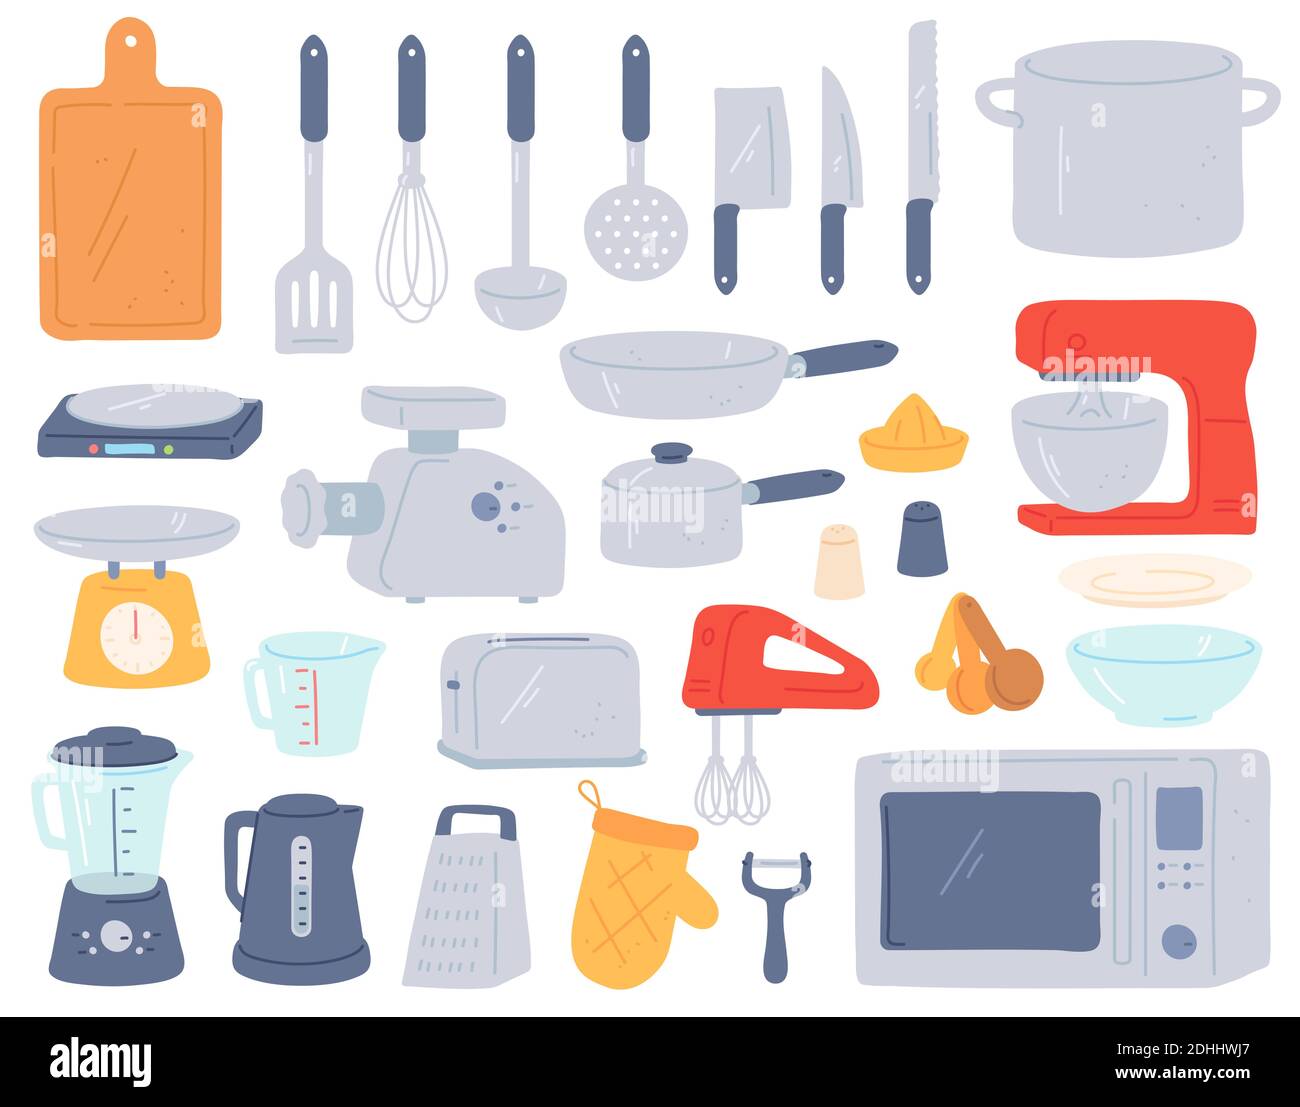 Kitchen tools. Cooking utensil and electric appliances for baking oven, mixer, scales, mincer. Home cookware in minimalist style vector set Stock Vector